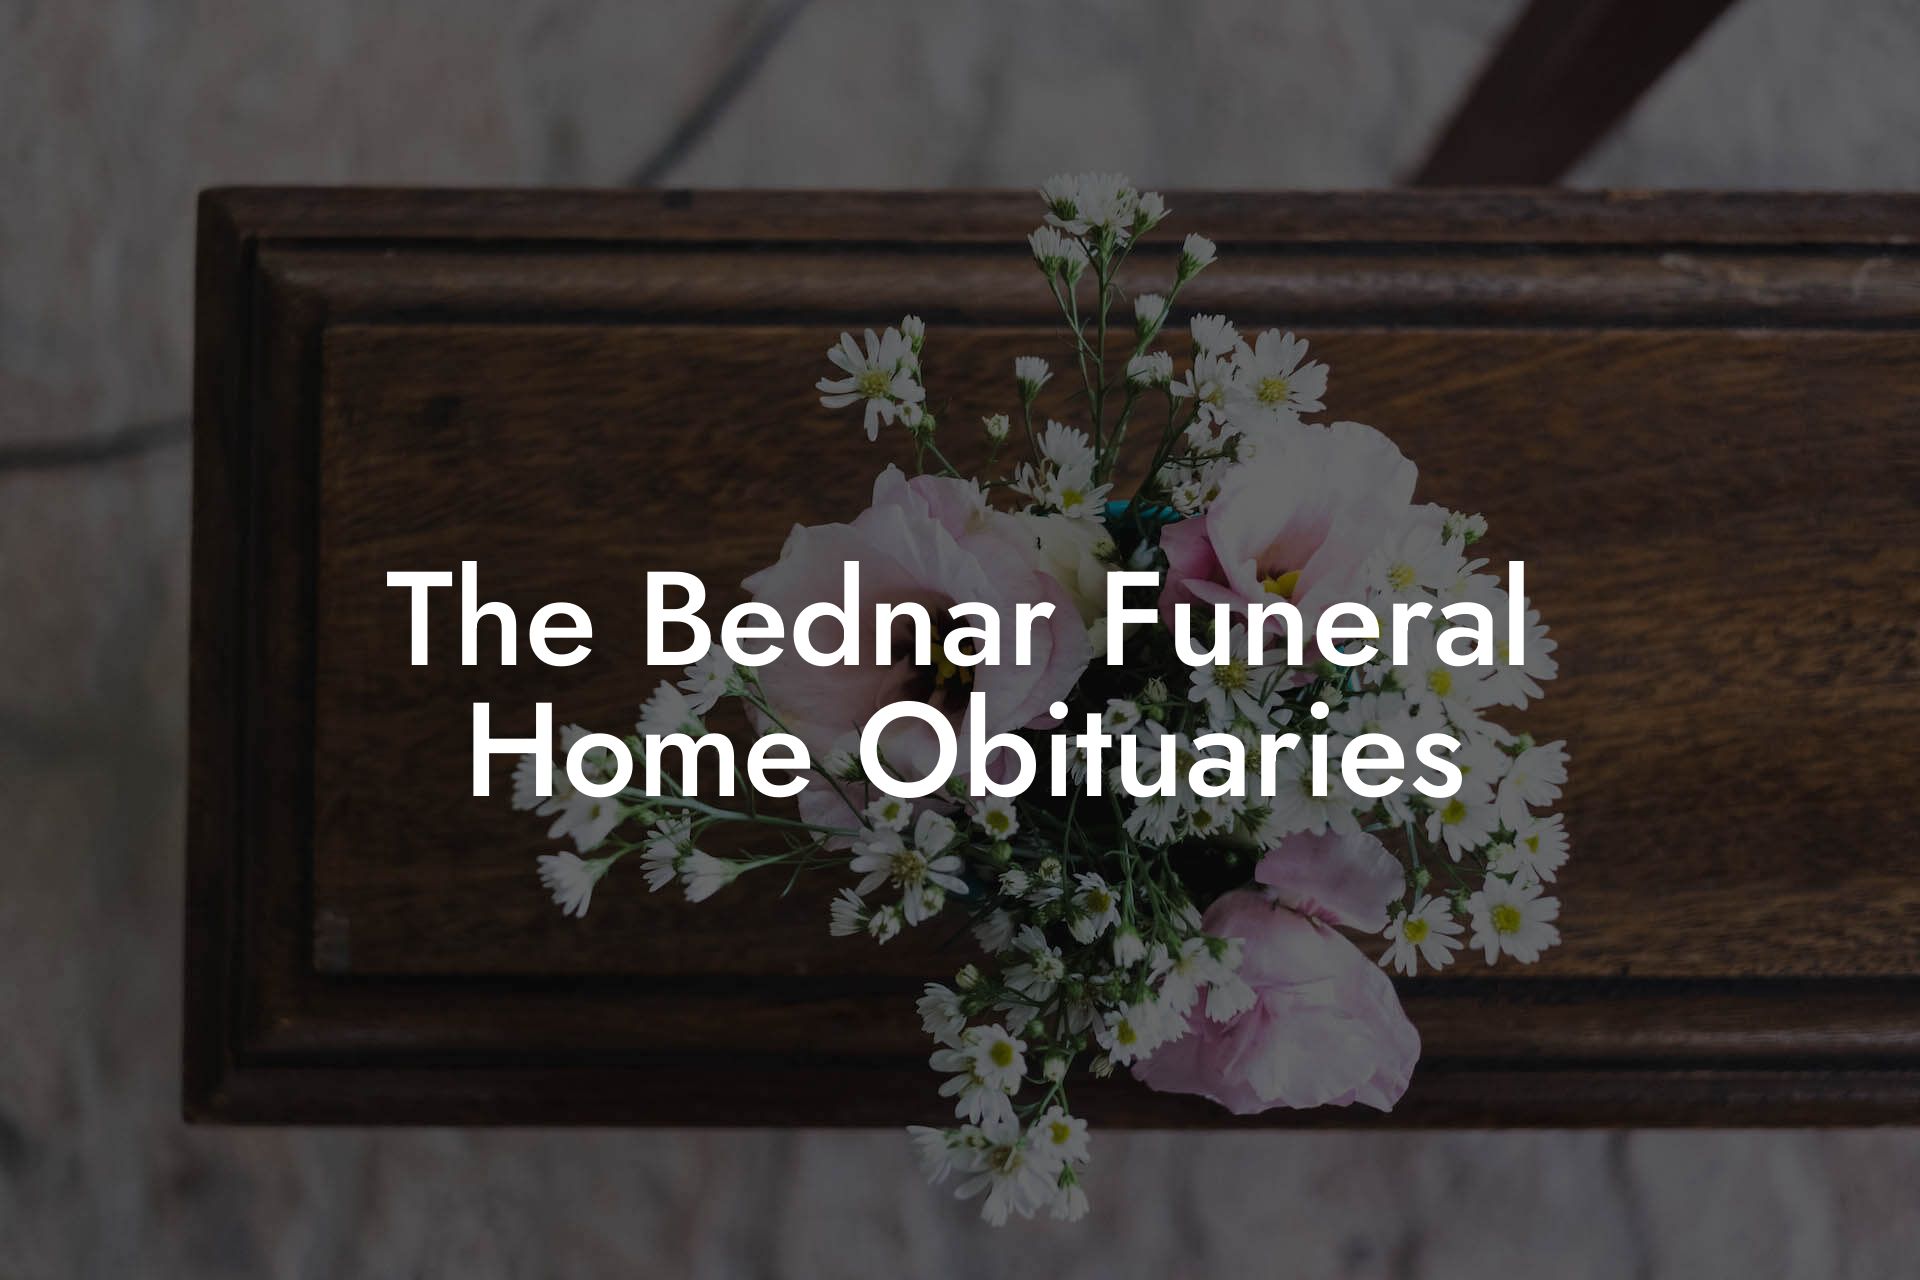 The Bednar Funeral Home Obituaries